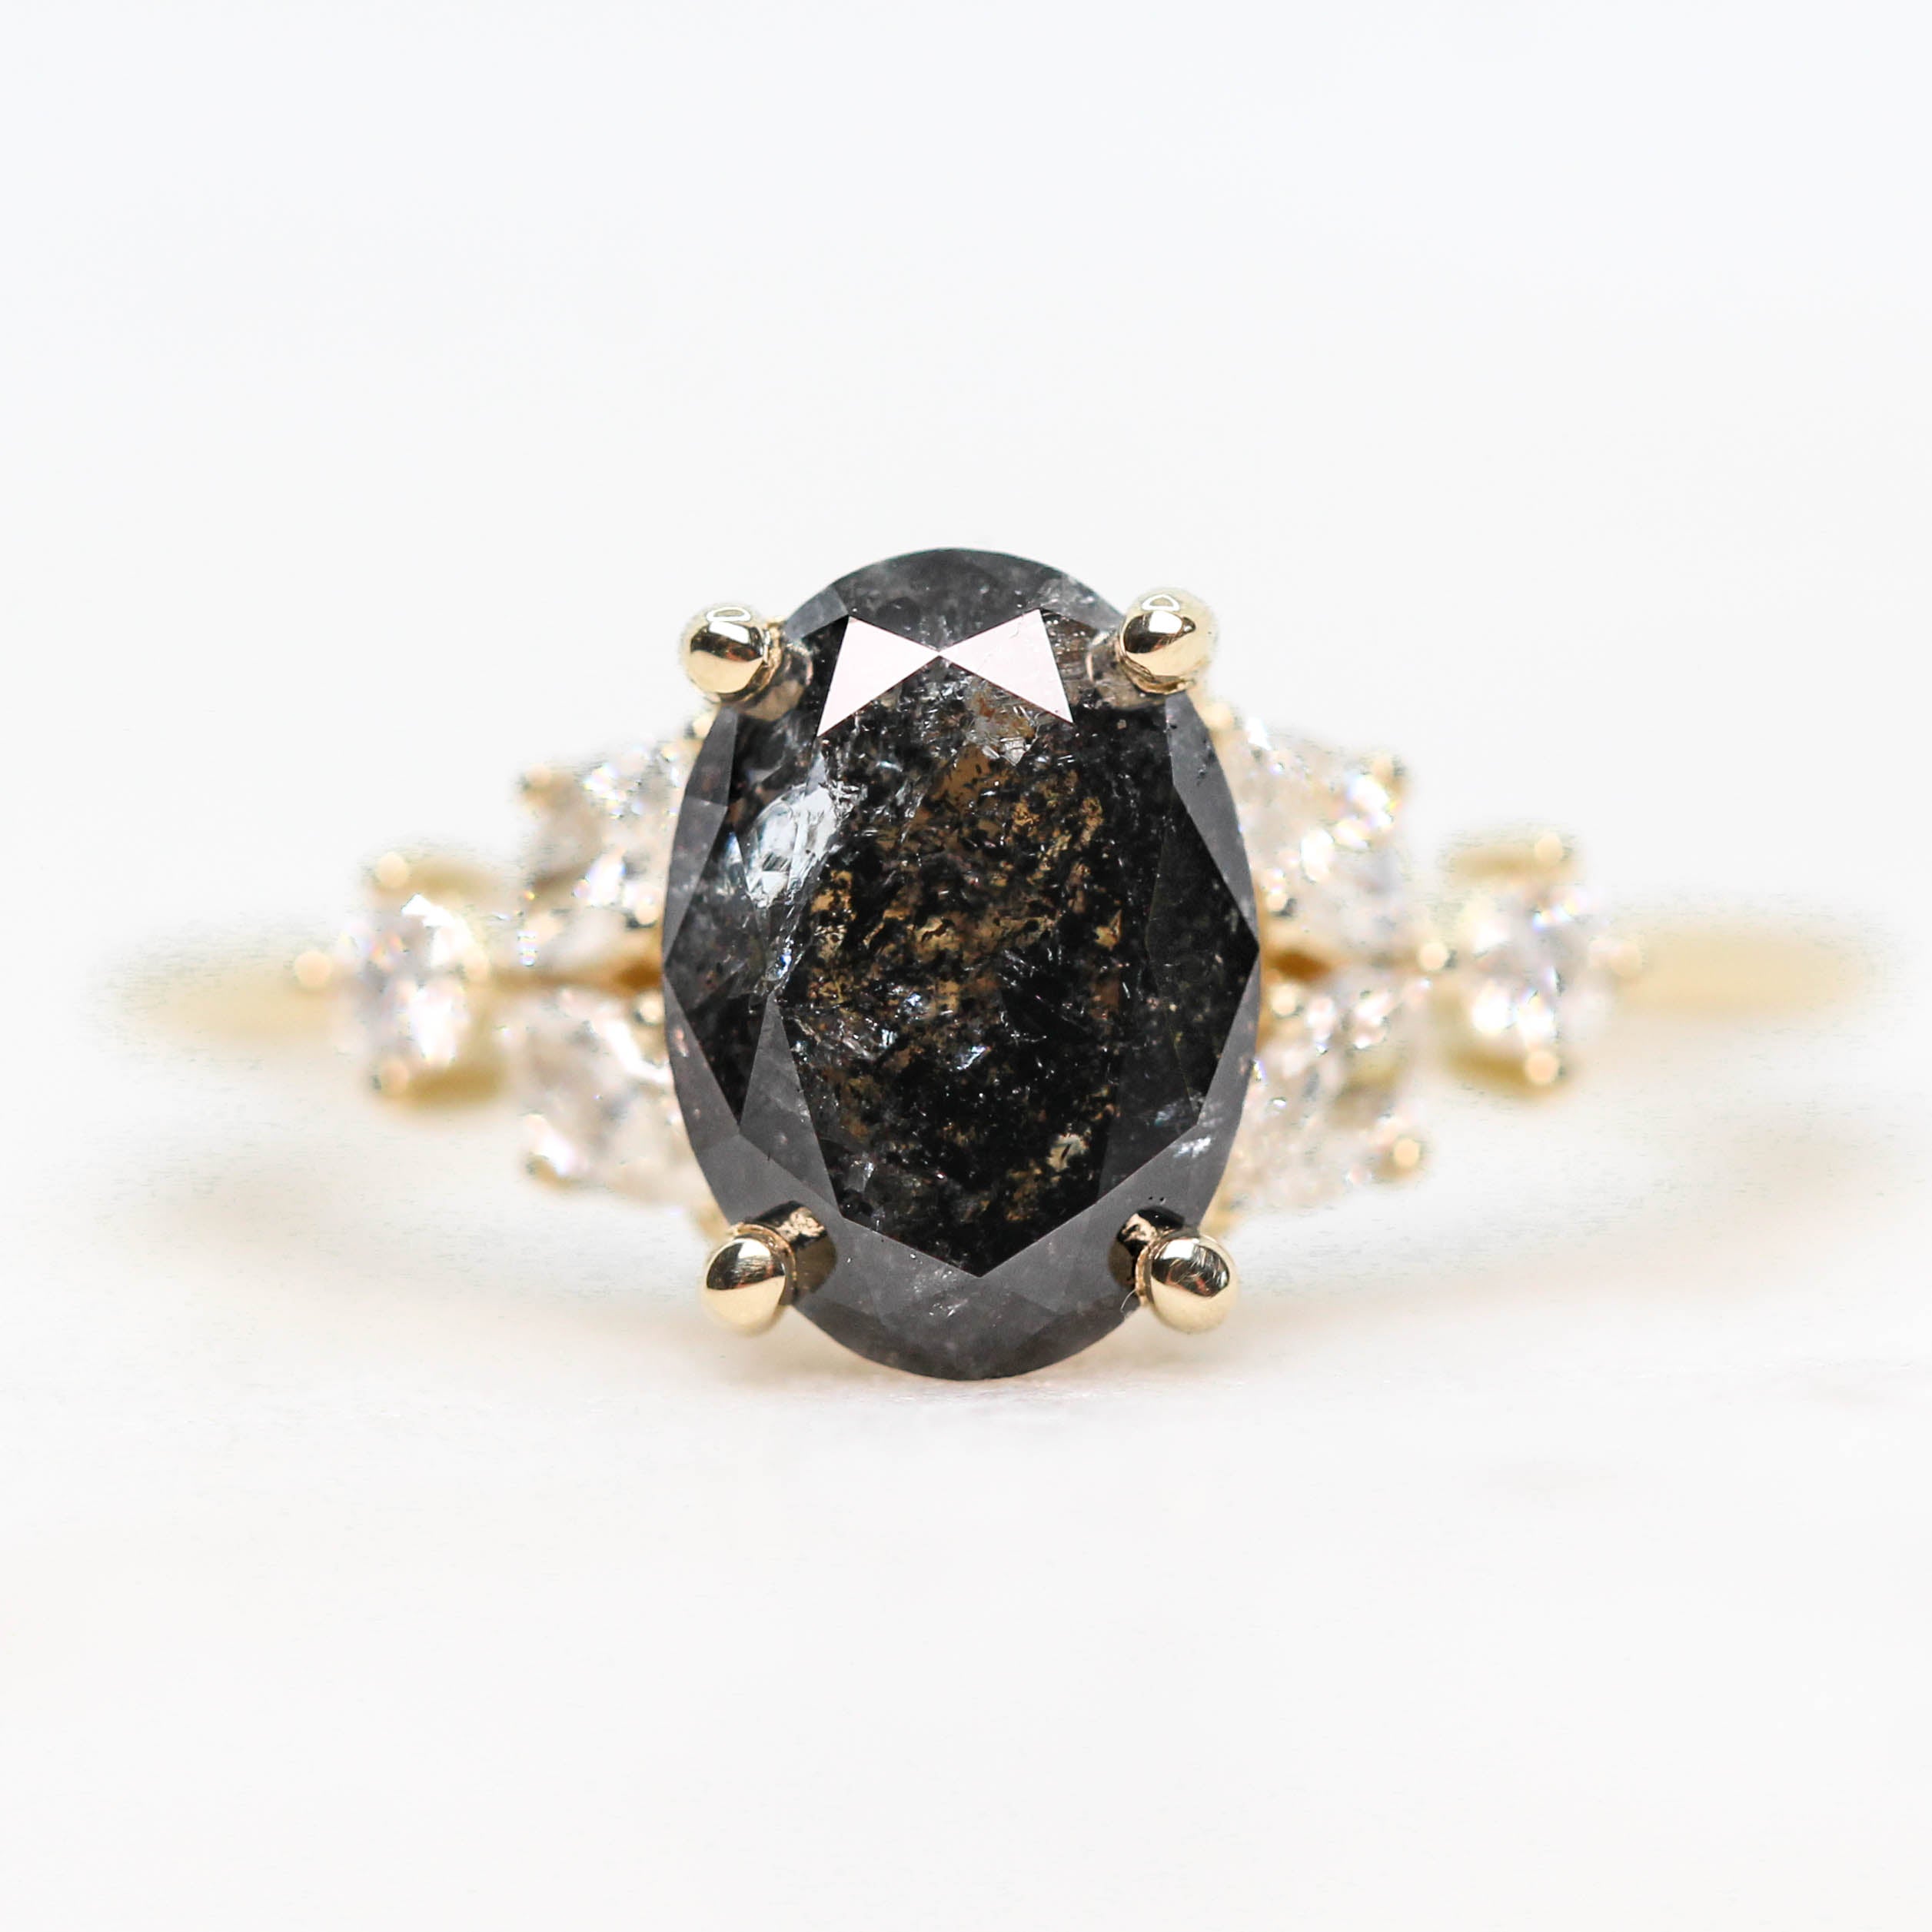 Andia Ring with a 1.80 Carat Oval Black Celestial Diamond and White Accent Diamonds in 14k Yellow Gold - Midwinter Co. Alternative Bridal Rings and Modern Fine Jewelry